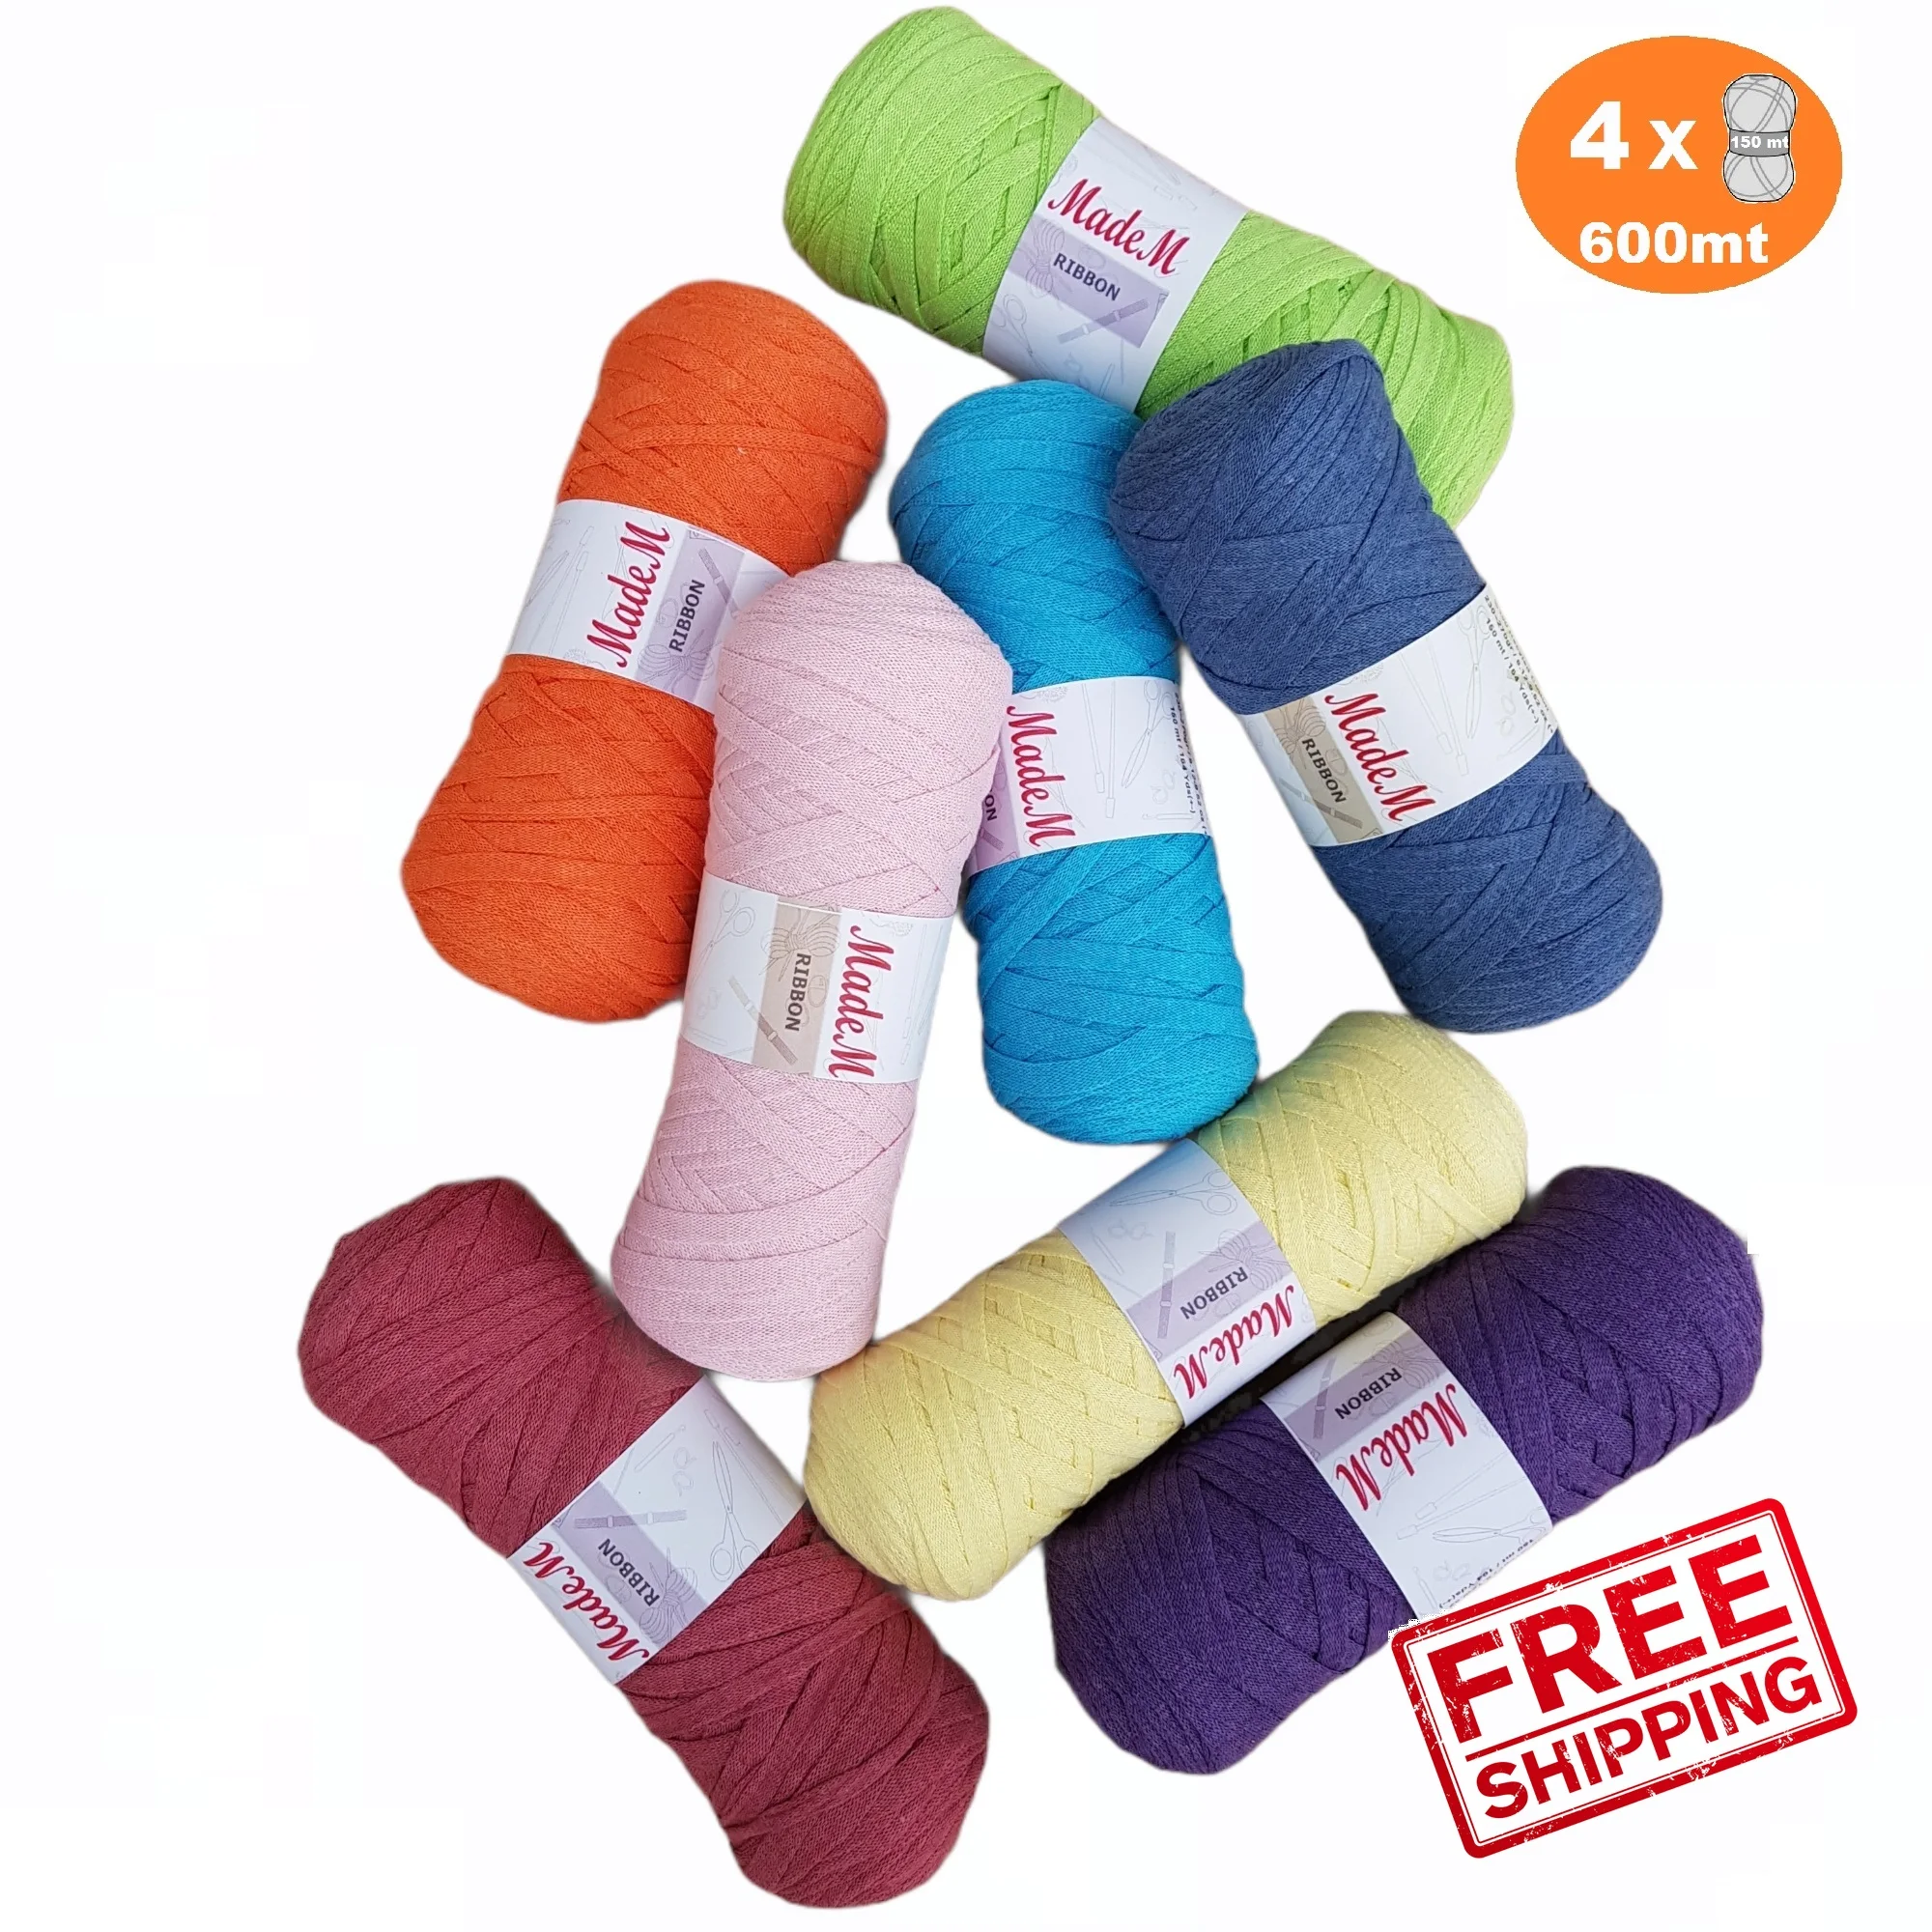 MadeM Ribbon 4x150mt T-Shirt Tape String Thread Cord Rope %100 Cotton Hand Knitting Crochet Home Accessories Rug Pouffe Booties